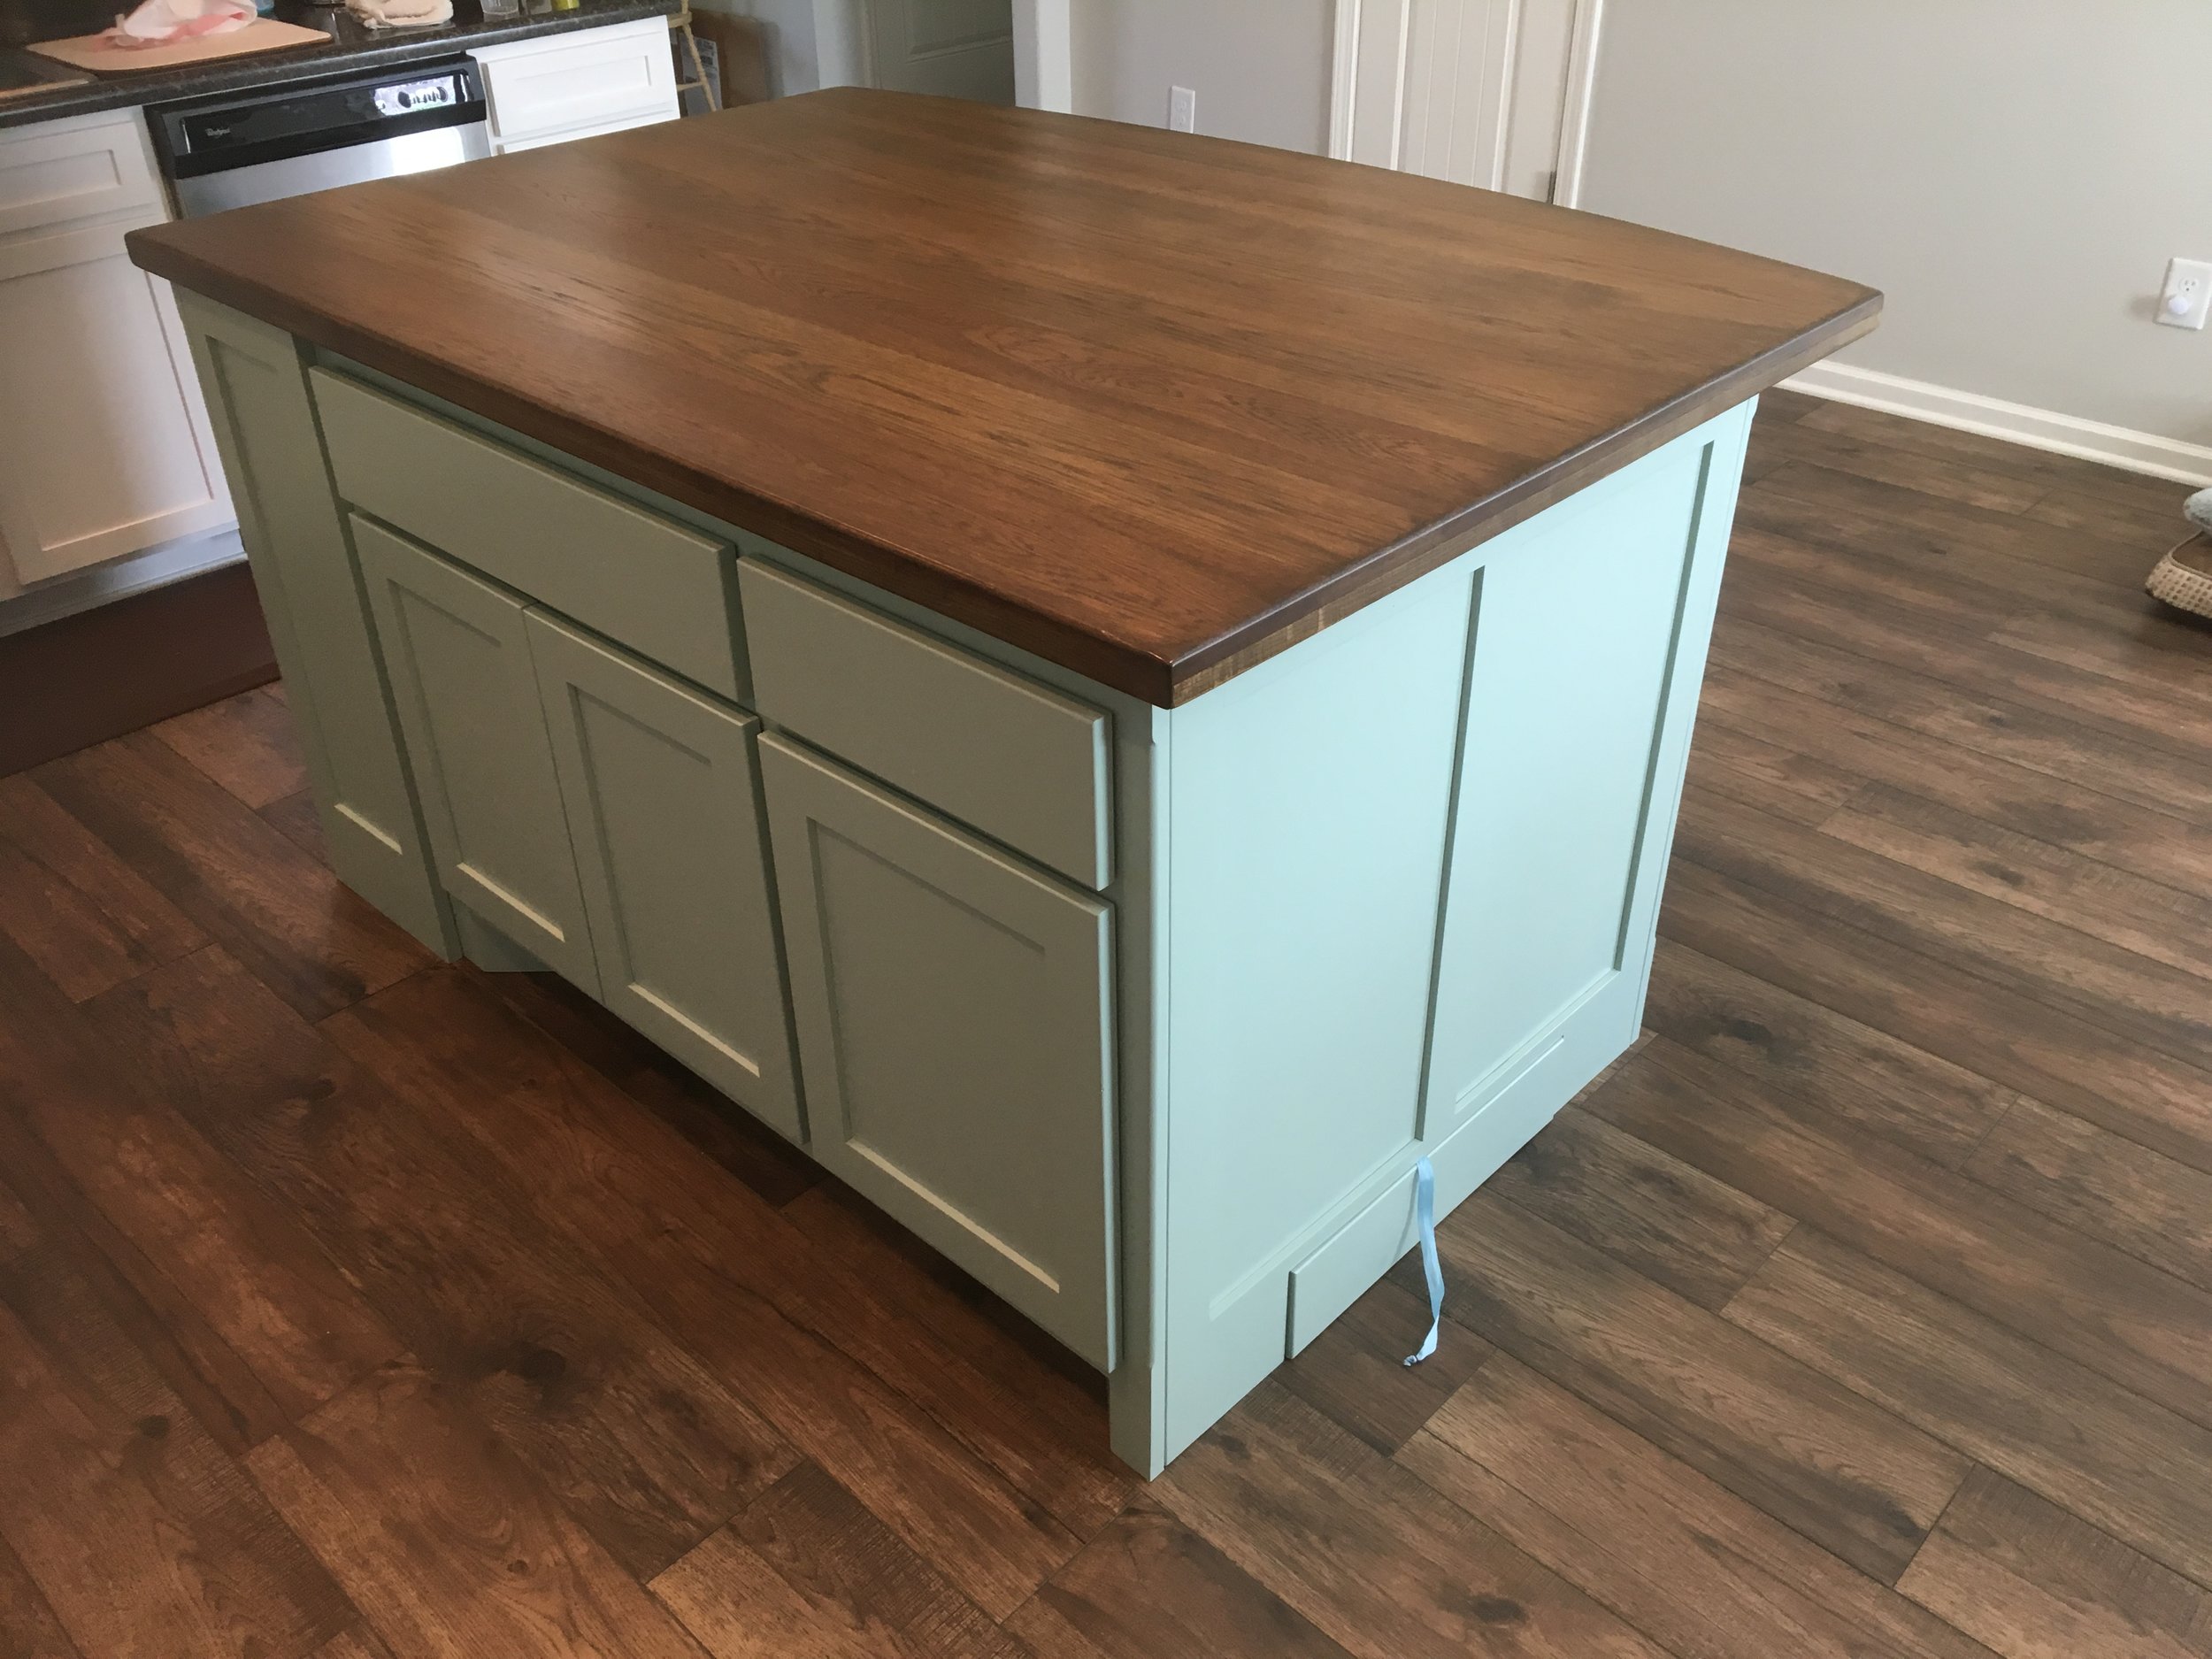 Cabinet Island/Hickory Countertop